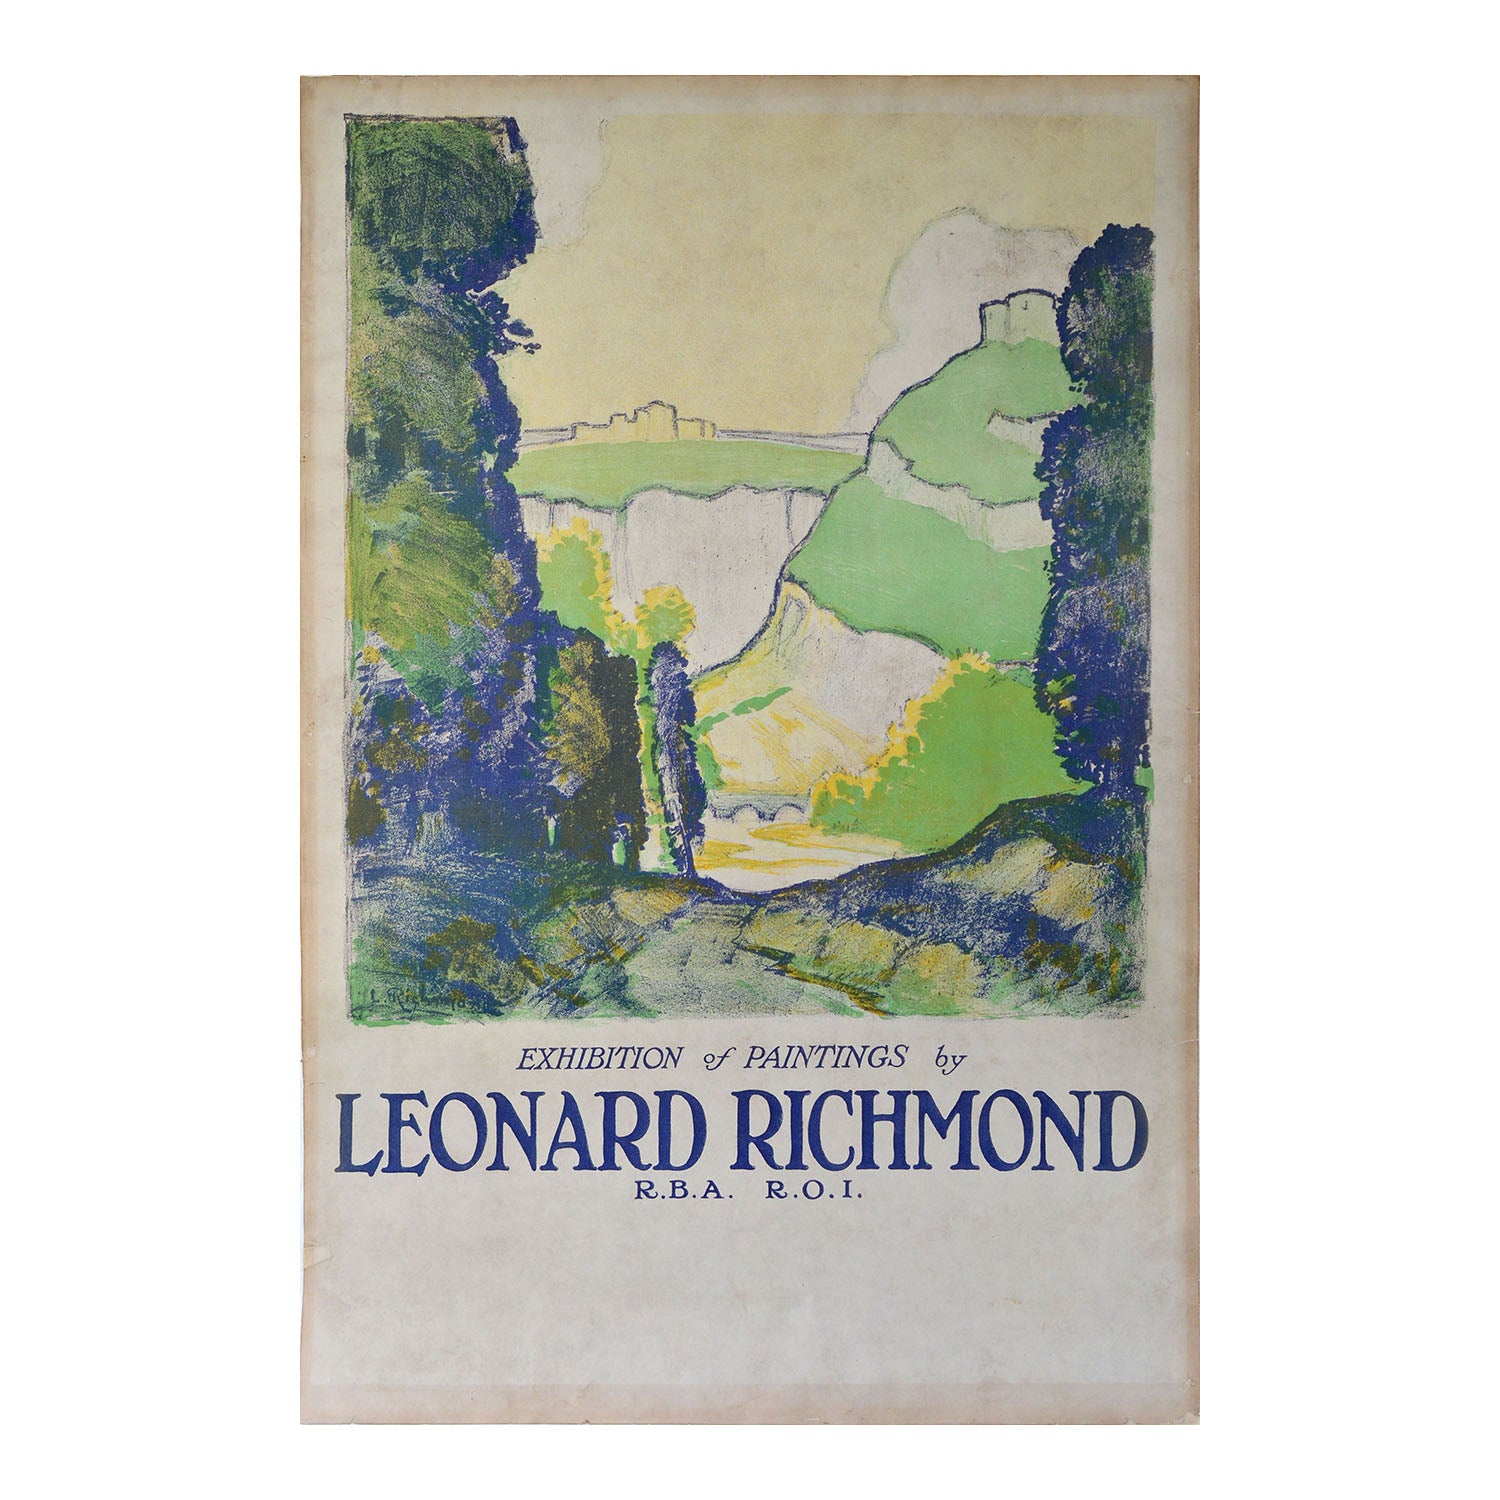 Original exhibition poster, Exhibition of Paintings by Leonard Richmond, 1919, depicting rolling green hills.